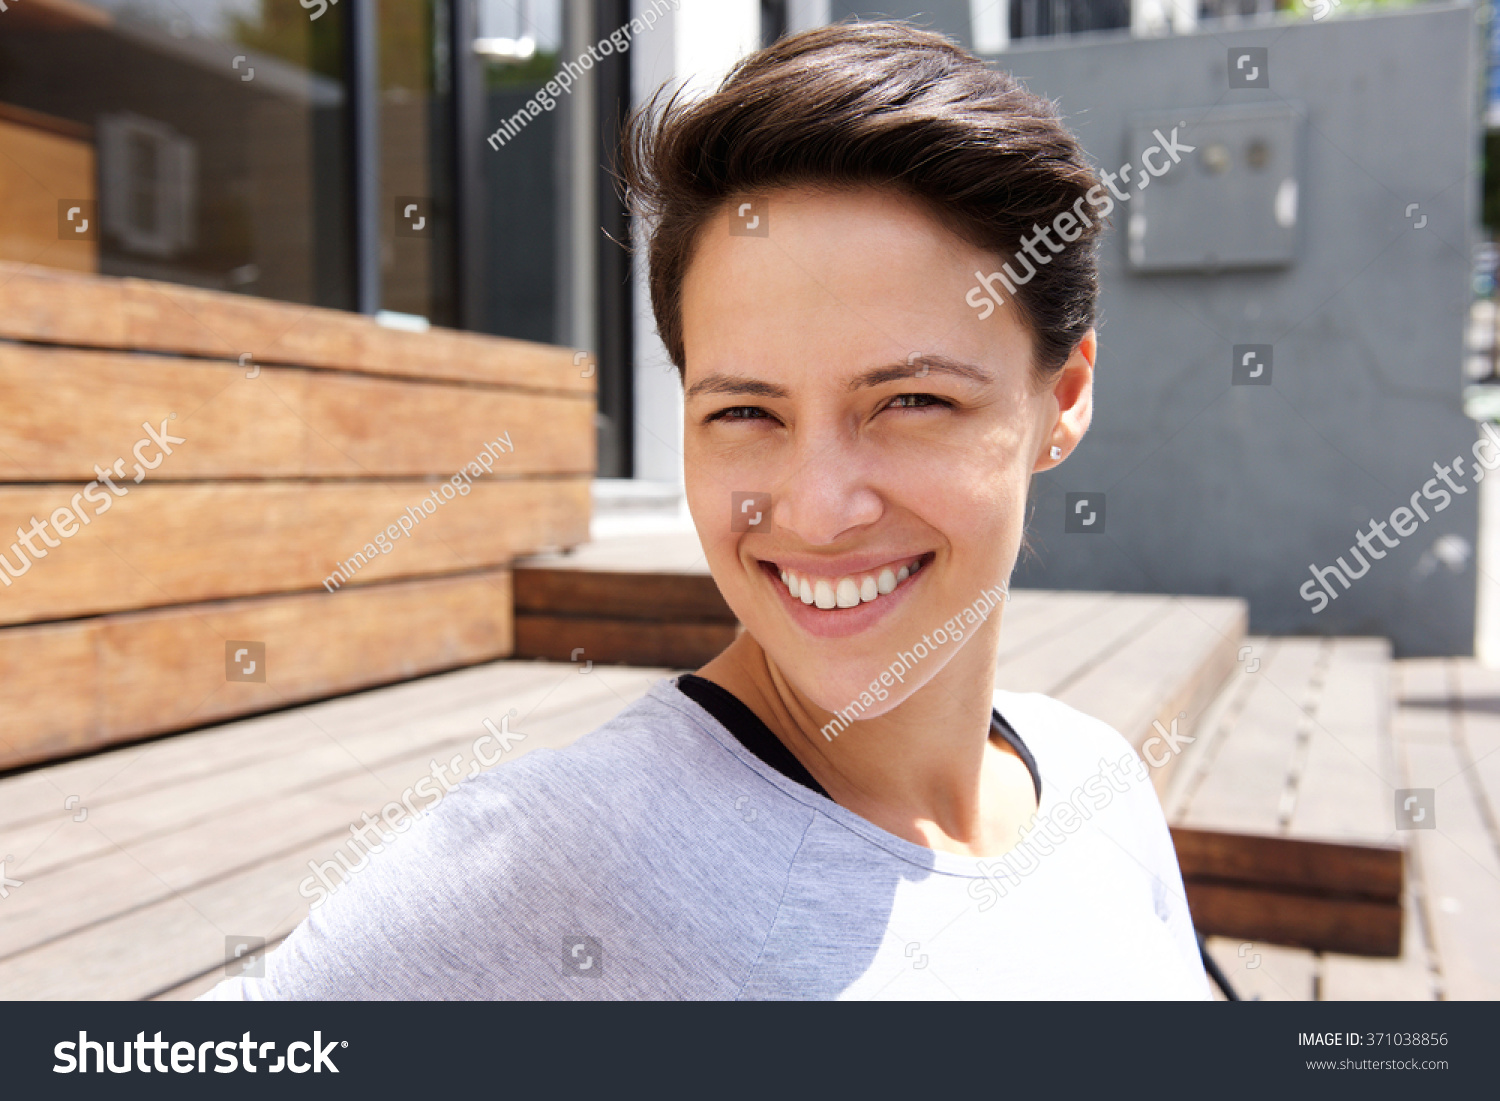 Close up portrait of a happy smiling young woman with short hair #371038856